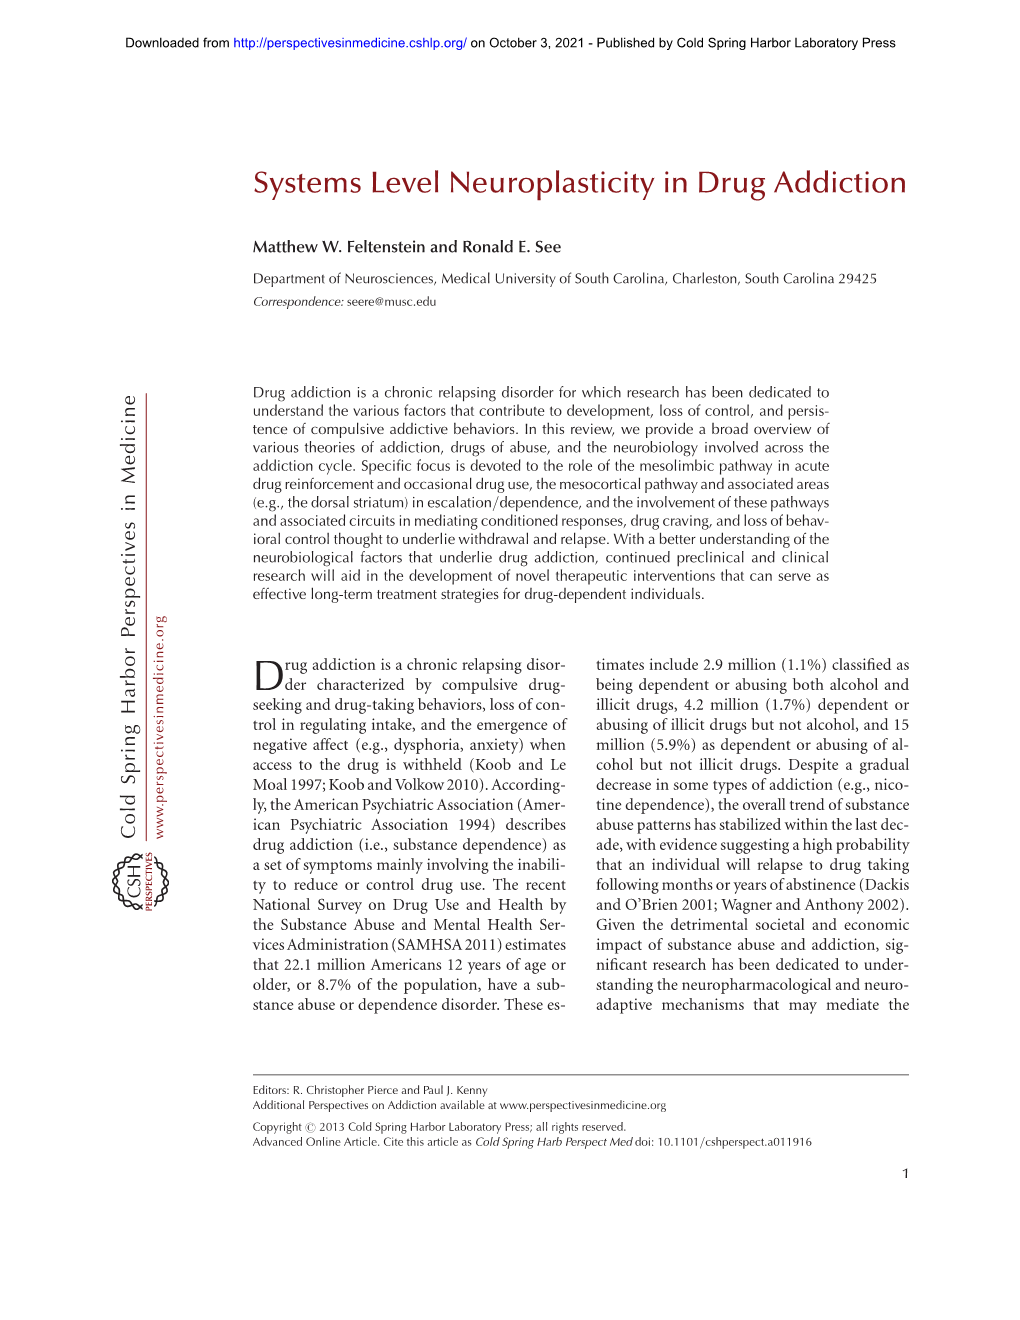 Systems Level Neuroplasticity in Drug Addiction